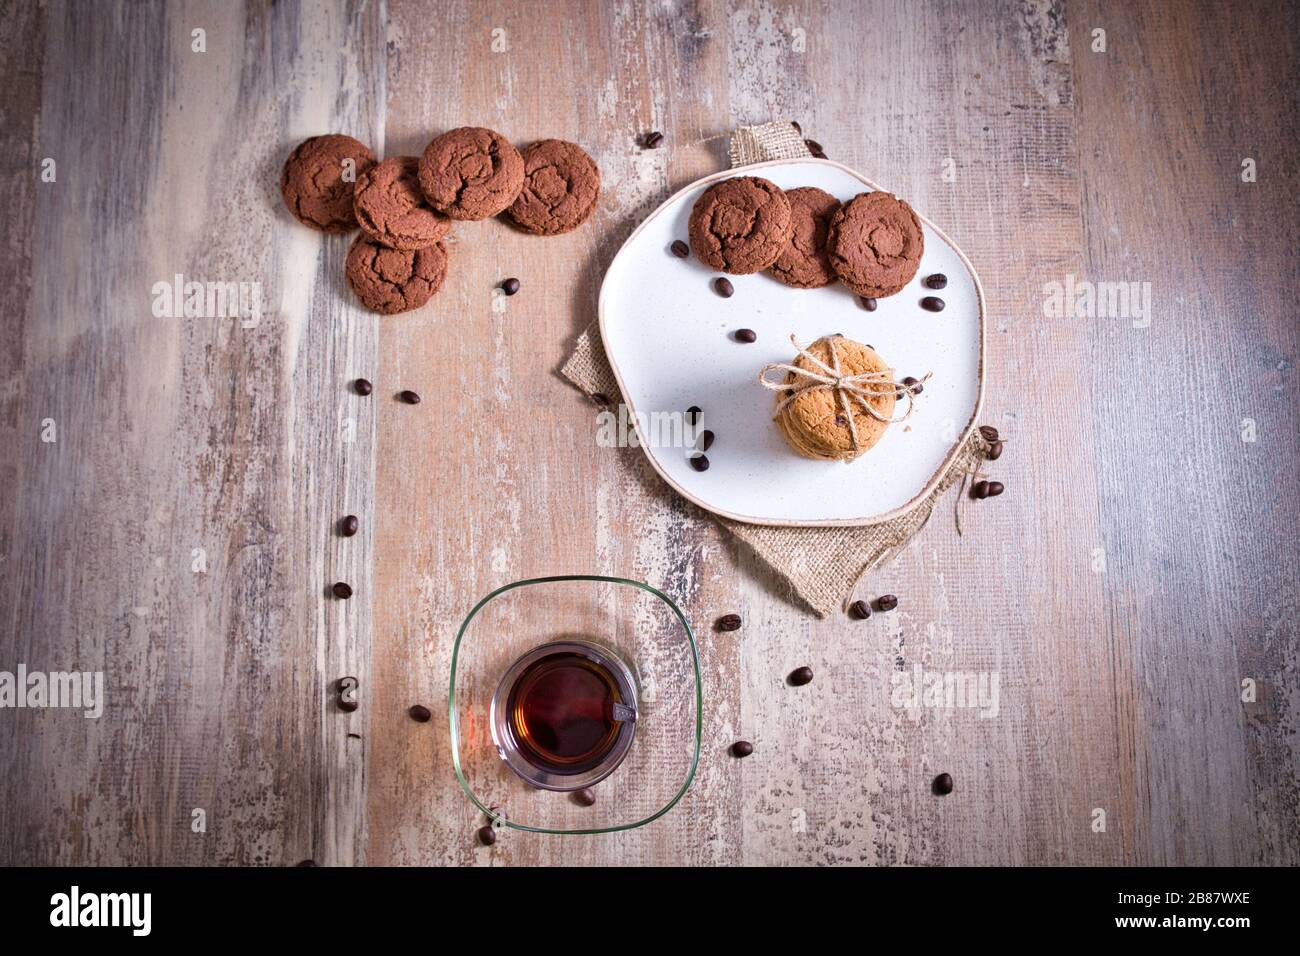 Beautifully stacked cookies with chocolate on Wooden table. Chocolate chip cookies Vintage Color. Traditional Turkish Tea. Stock Photo